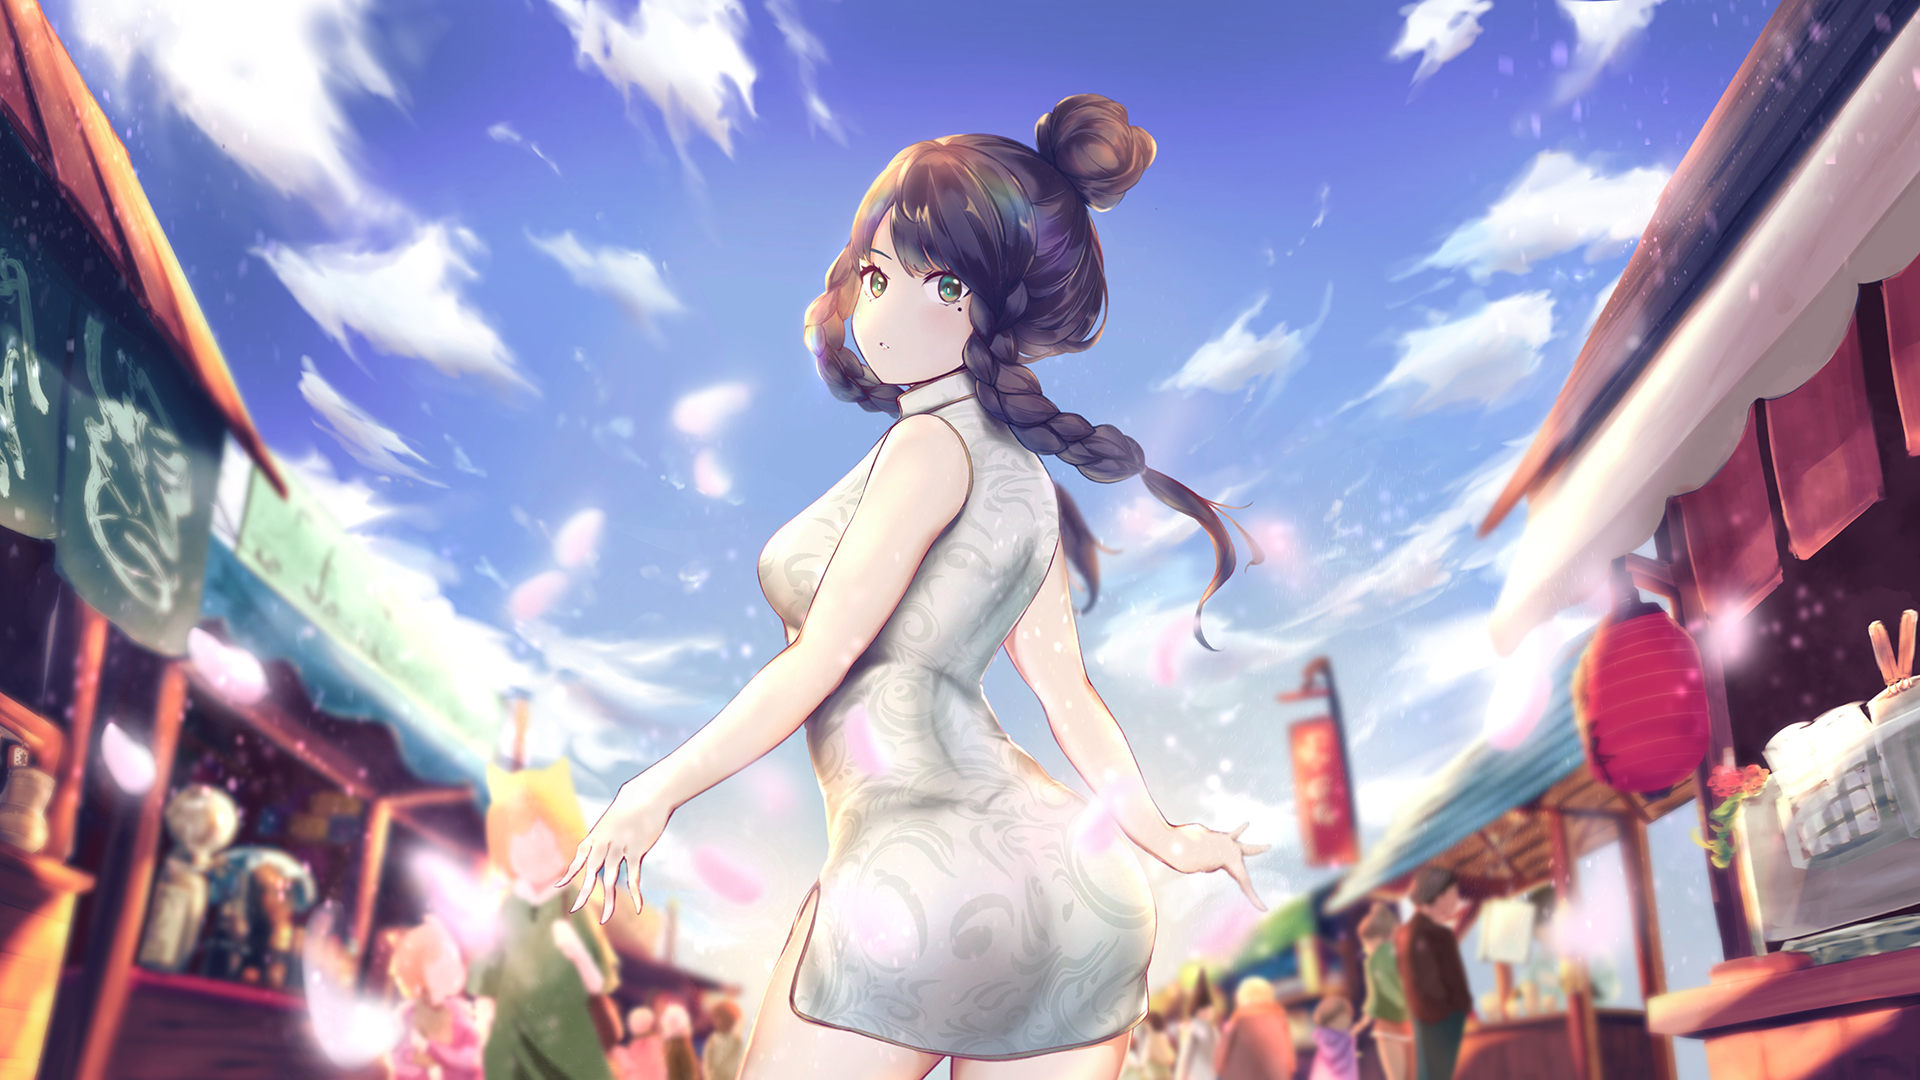 Long Hair Brunette Chinese Clothes Clouds Anime Girls Dark Hair Twintails Sky City Markets Green Eye 1920x1080